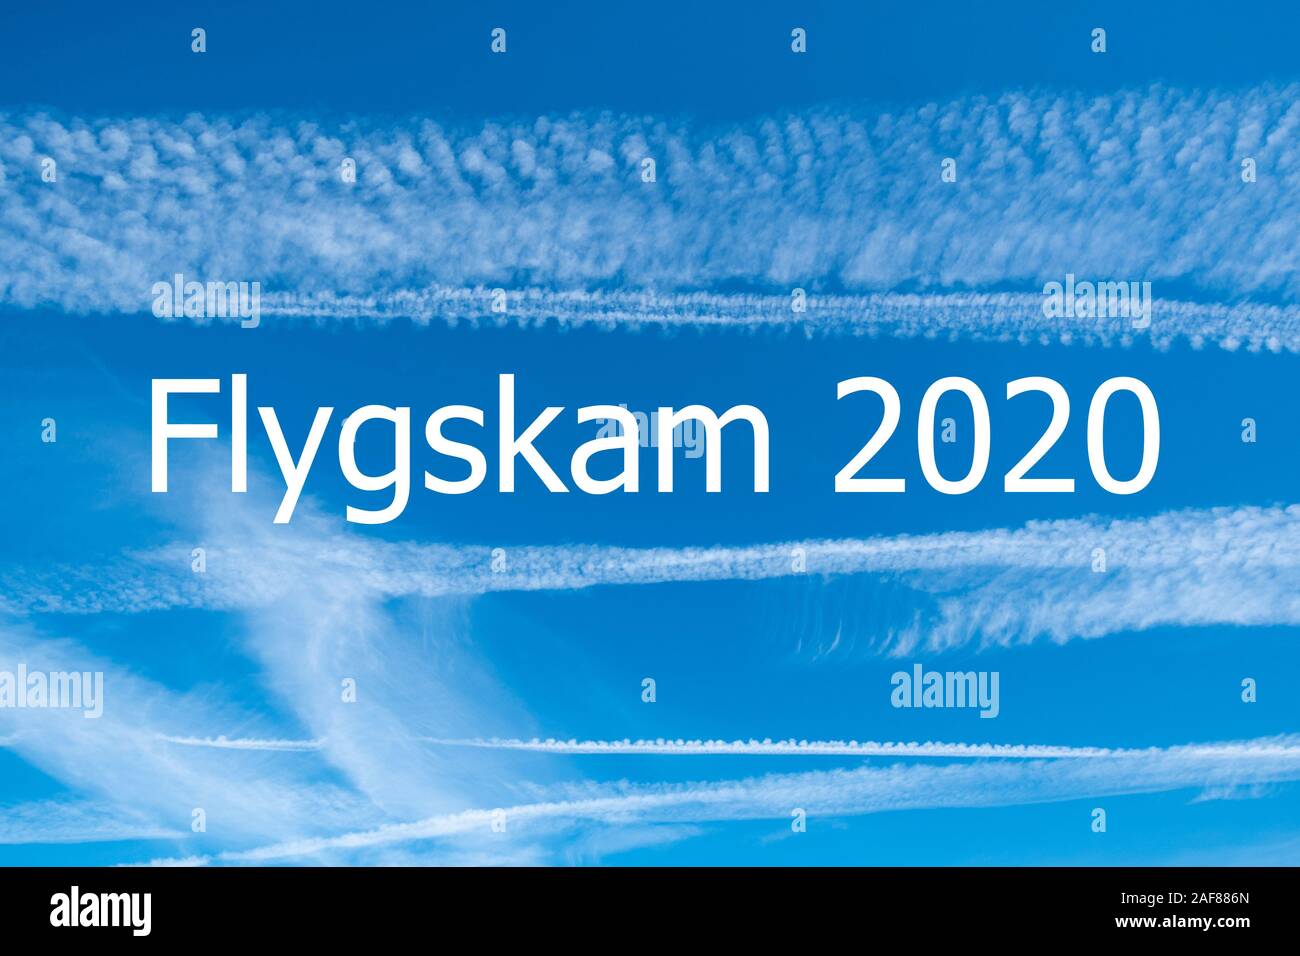 Climate change and flygskam concept image with blue sky and vapour trails from aircraft with the words Flygskam 2020 Stock Photo